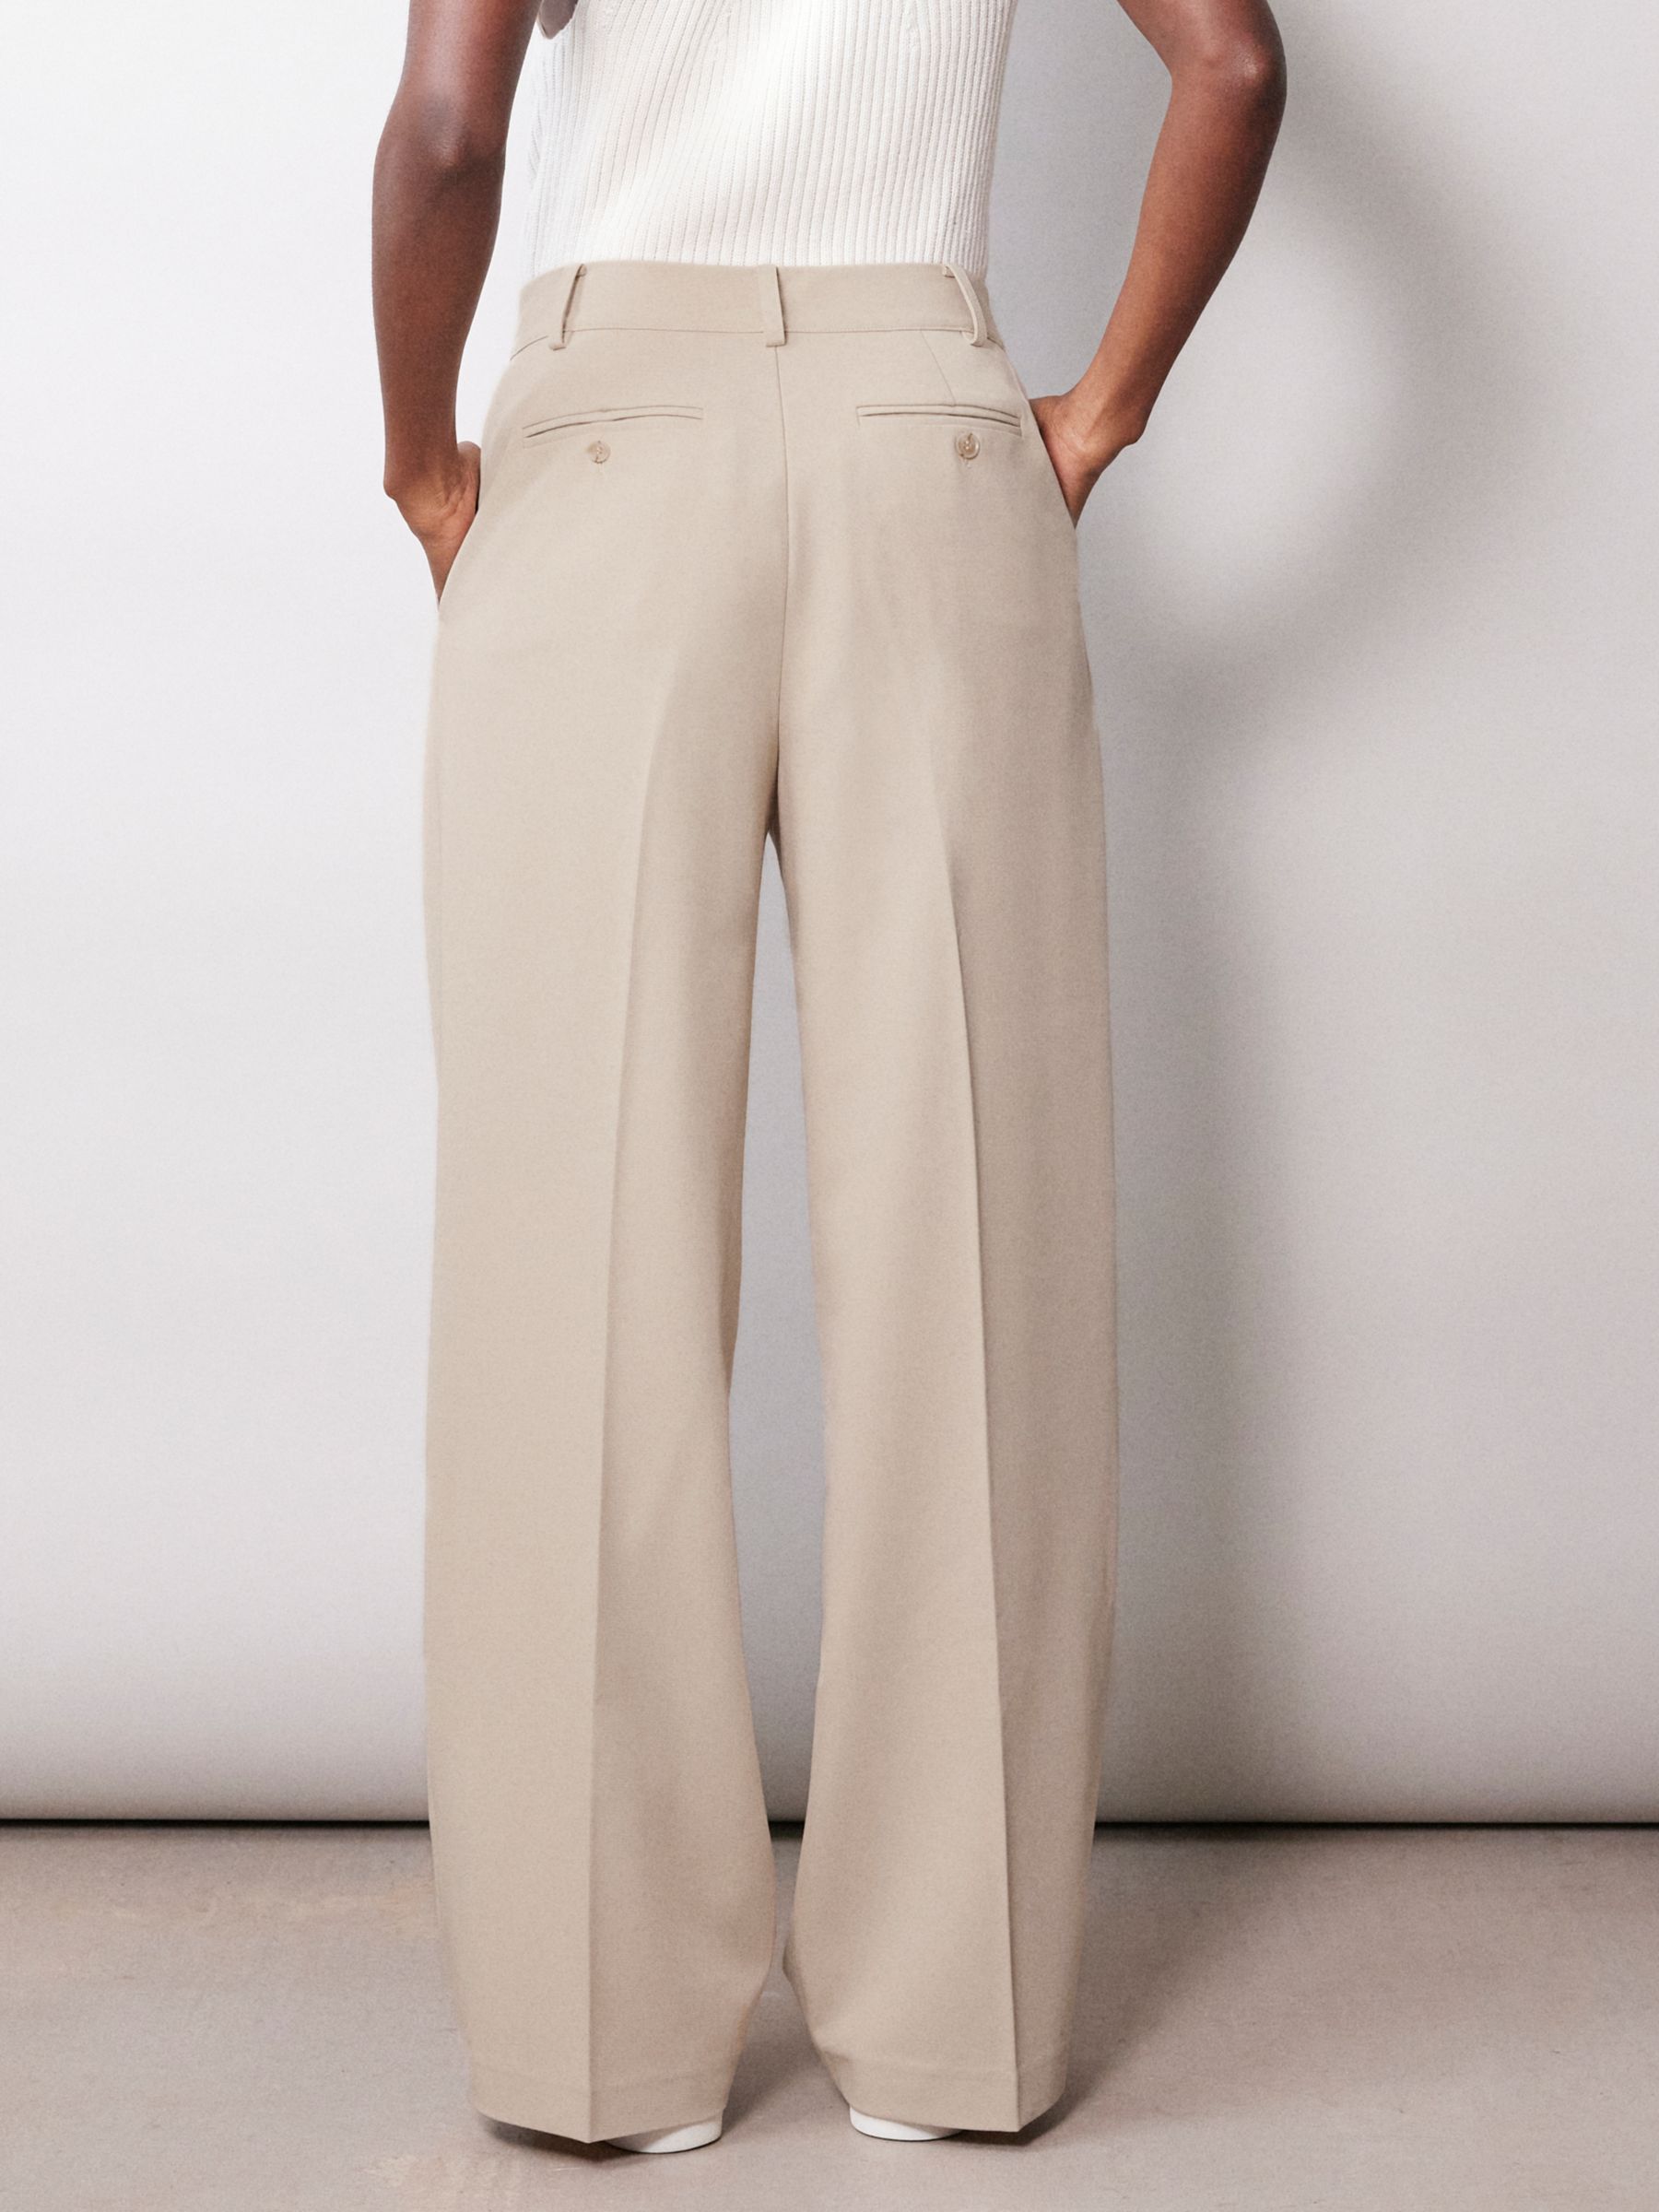 Albaray Pleat Front Tailored Trousers, Stone at John Lewis & Partners